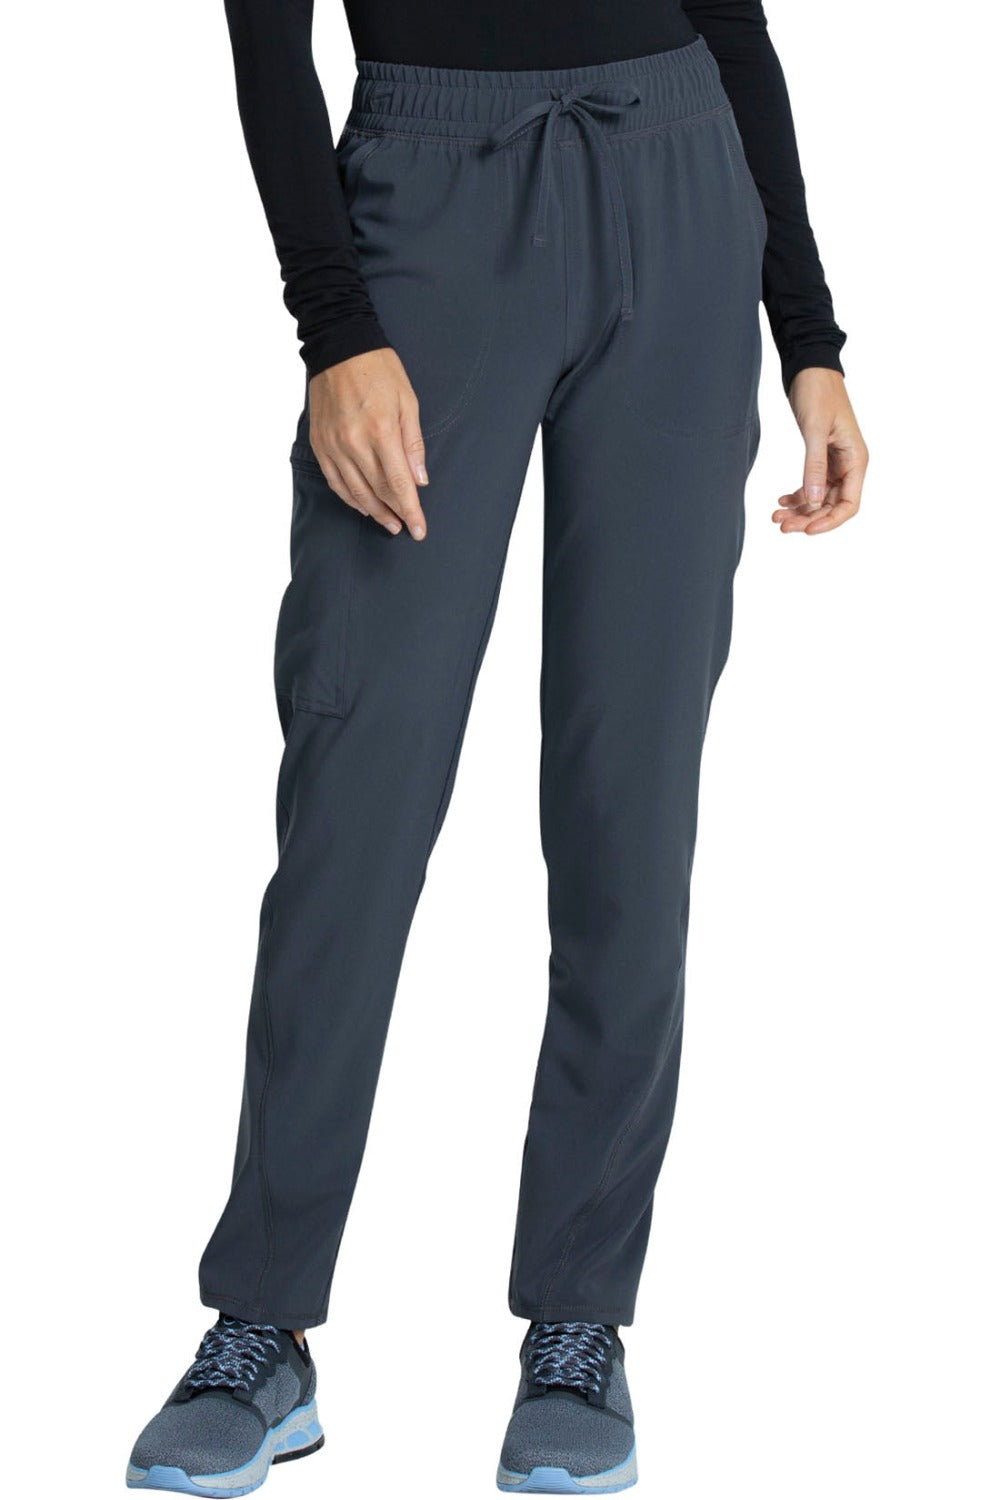 Cherokee Allura Petite Scrub Pant Mid Rise Tapered Leg Drawstring in Pewter at Parker's Clothing and Shoes.